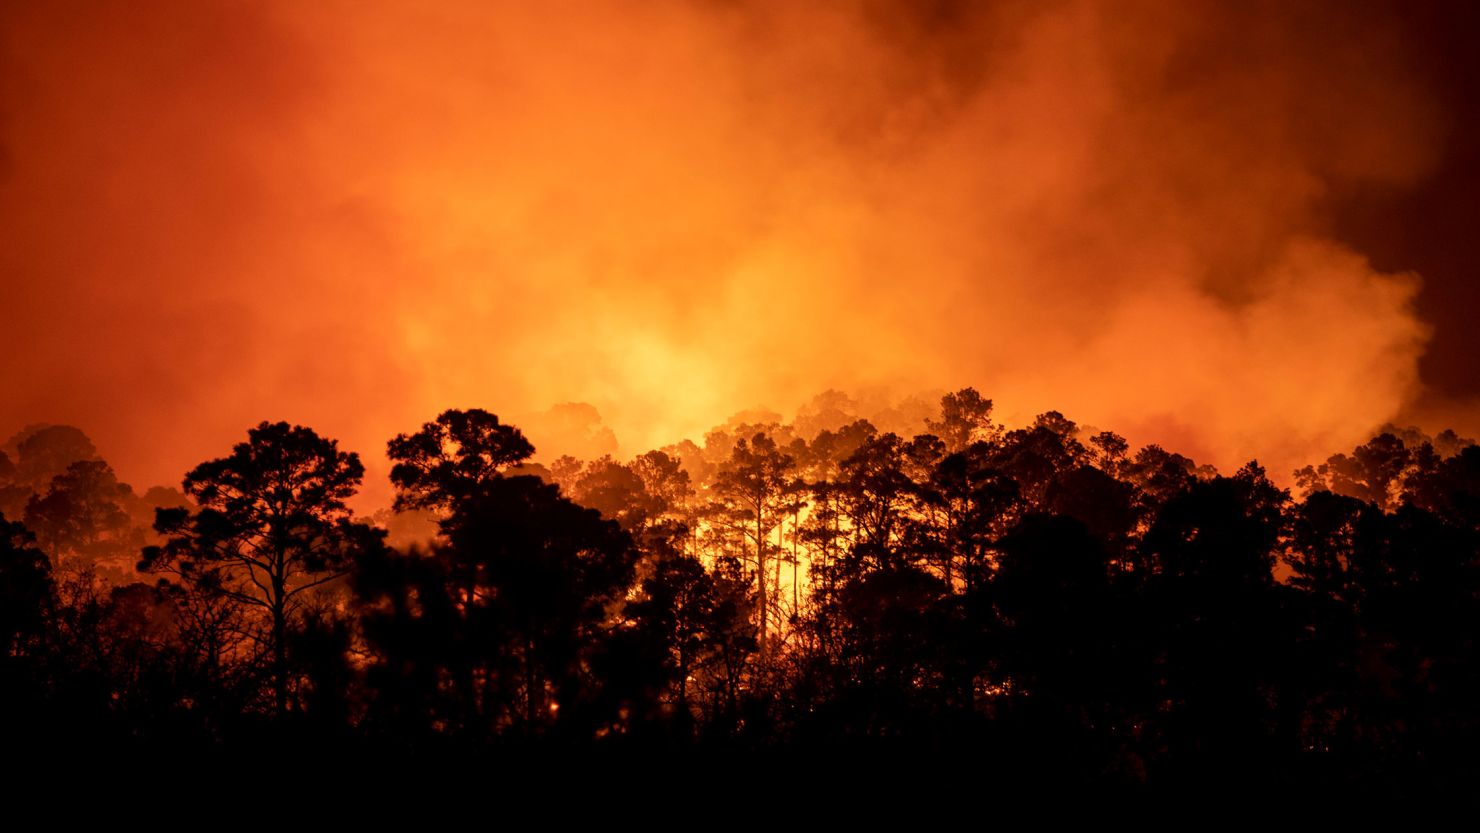 The Rolling Pines Fire in Bastrop County, Texas, forced some residents to evacuate